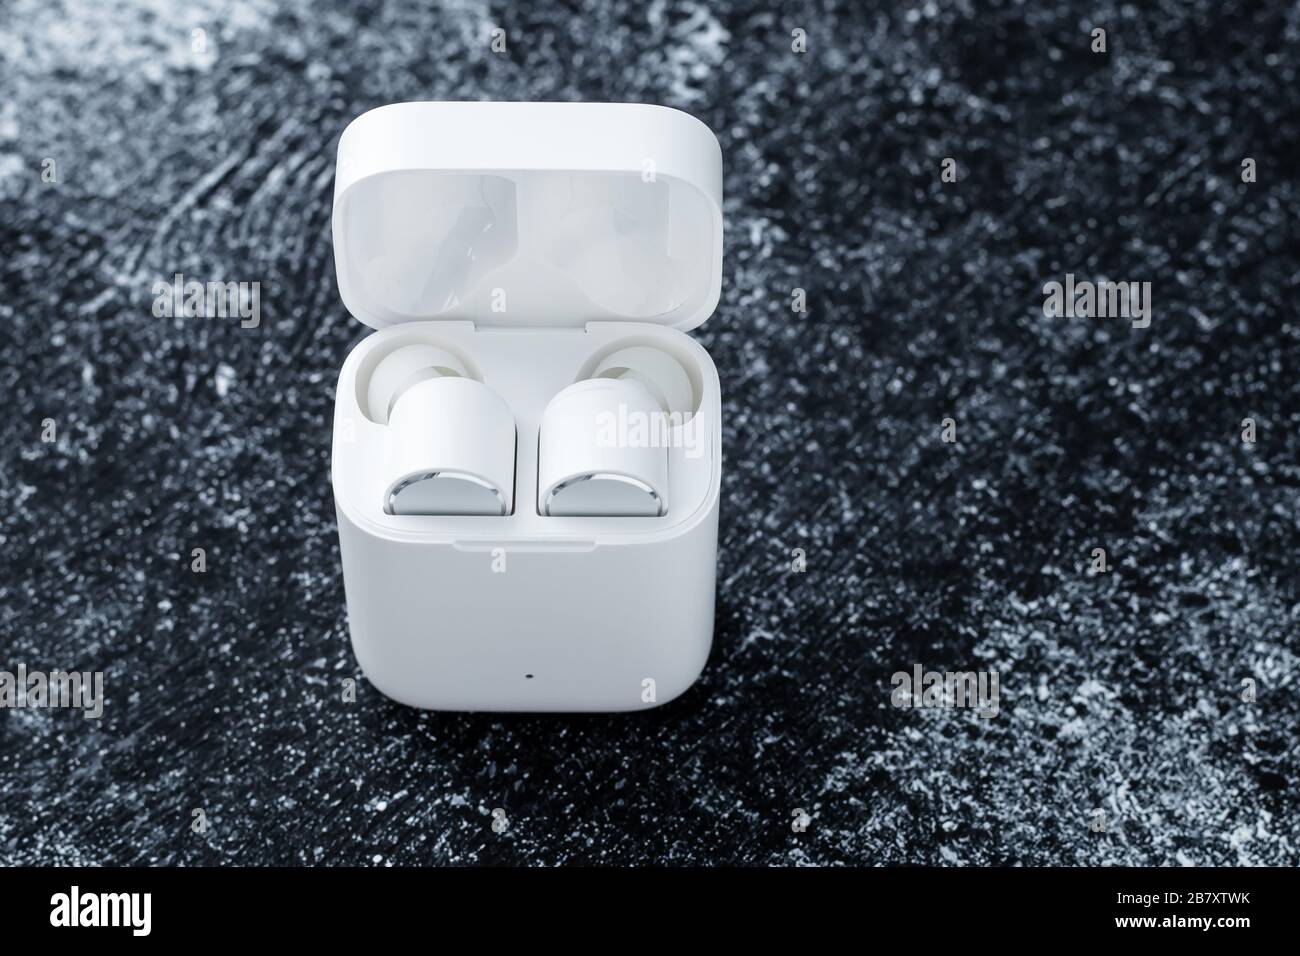 Bluetooth white earphones with charging case on dark grunge background. Gadget for listen a music. Electronic device. Empty space for text Stock Photo